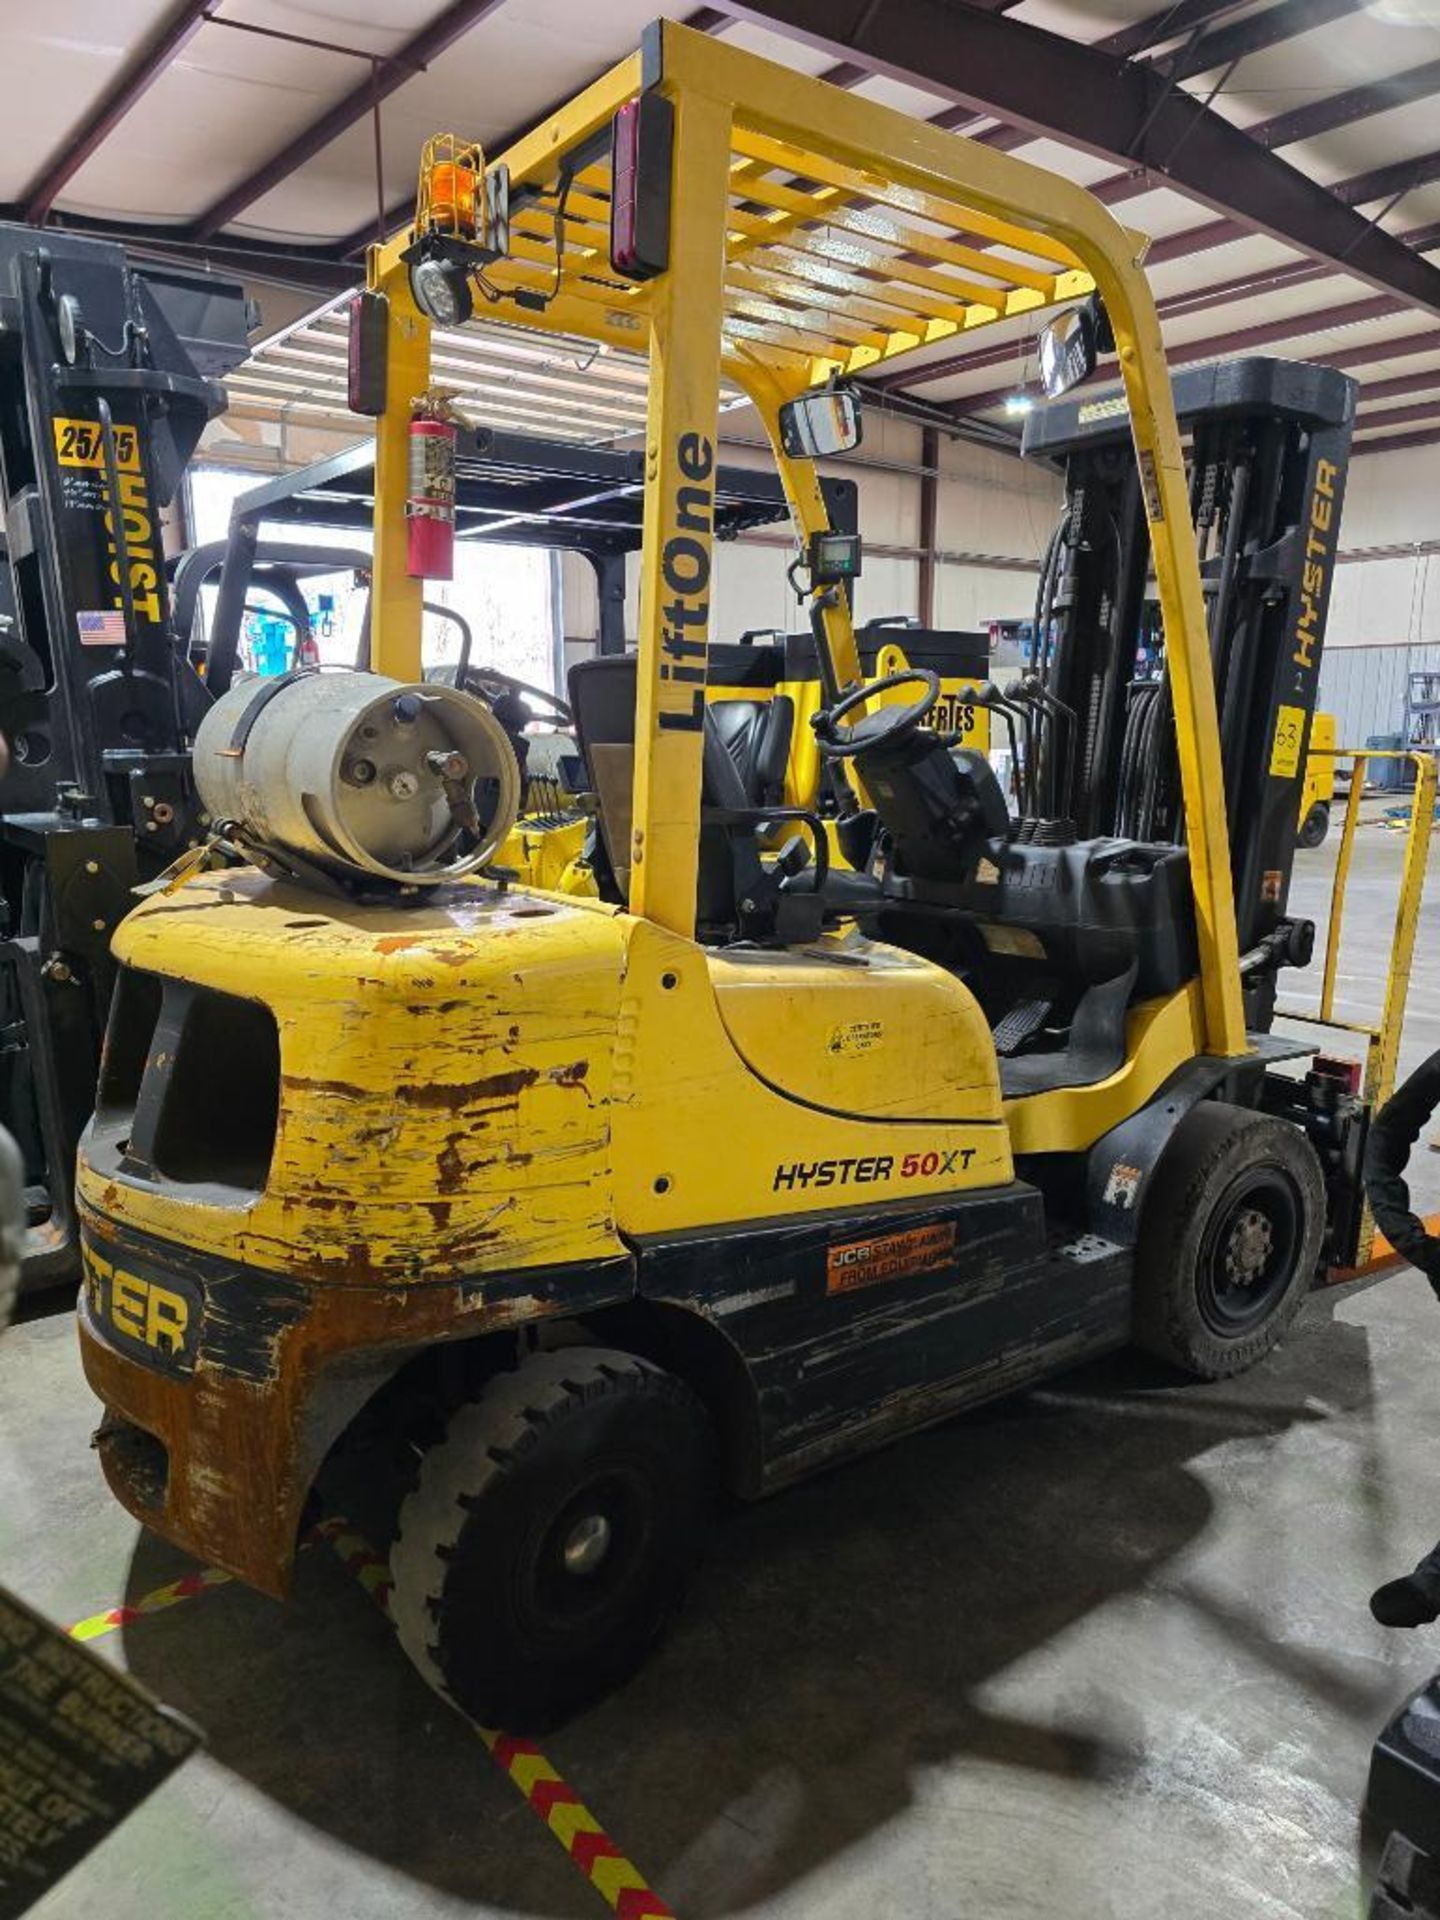 2018 Hyster H50XT 5,000 LB. Forklift, S/N A380V06798S, 195" Lift Height, Solid Cushion Tires, Sidesh - Image 8 of 13